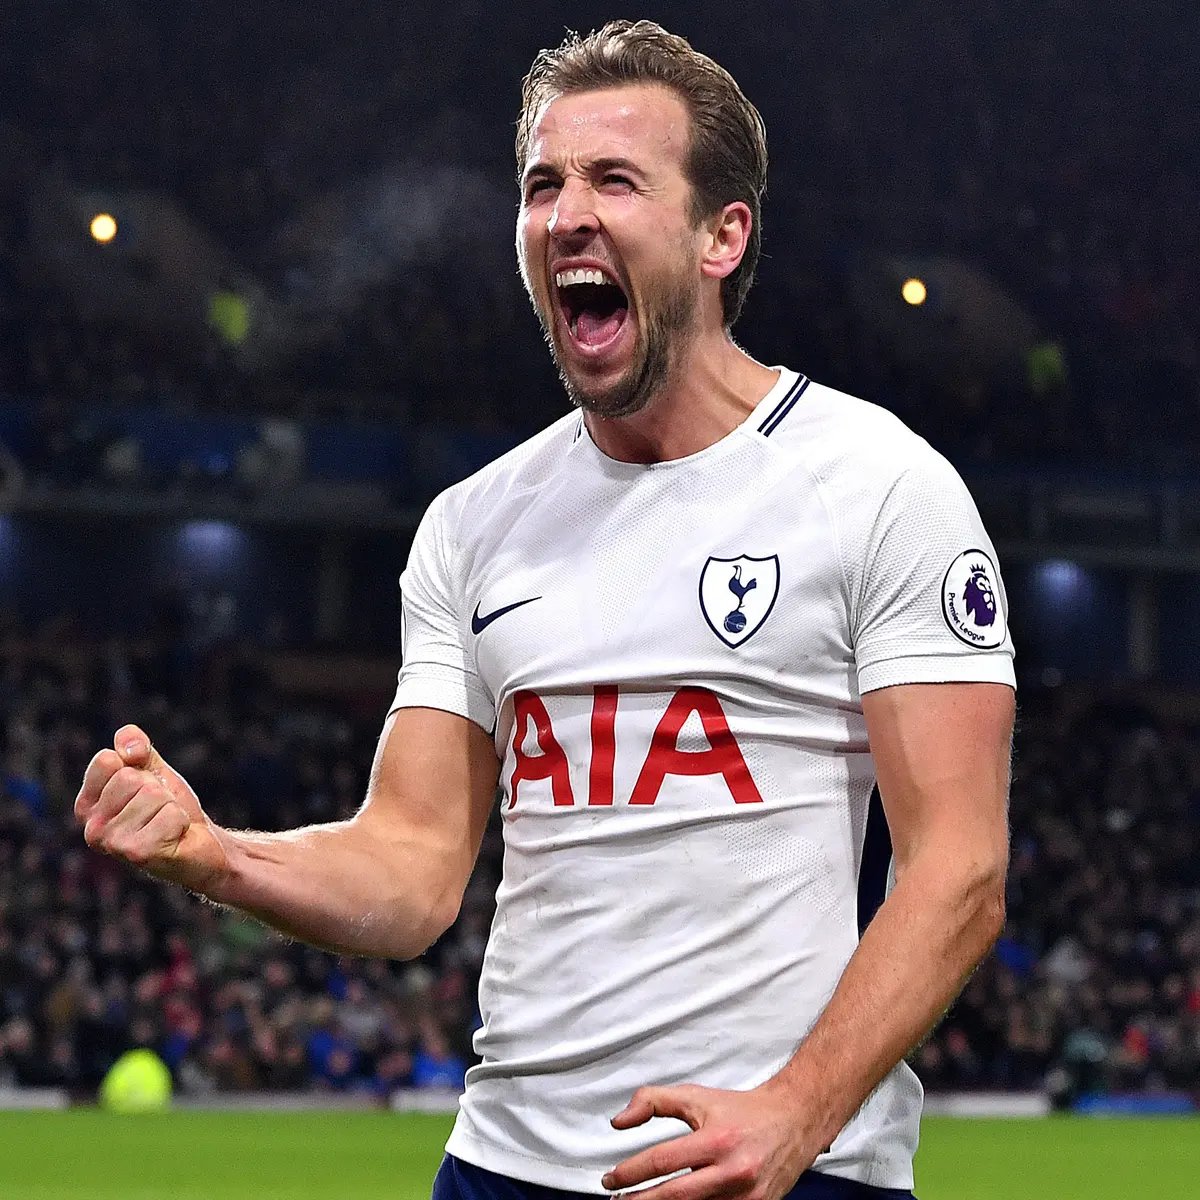 [THREAD] It’s the start of a new season & after  #THFC’s dire performance against Everton, I started to wonder...𝗪𝗶𝗹𝗹 𝗛𝗮𝗿𝗿𝘆 𝗞𝗮𝗻𝗲 𝗯𝗲𝗮𝘁 𝗔𝗹𝗮𝗻 𝗦𝗵𝗲𝗮𝗿𝗲𝗿’𝘀 𝗮𝗹𝗹-𝘁𝗶𝗺𝗲 𝗣𝗿𝗲𝗺𝗶𝗲𝗿 𝗟𝗲𝗮𝗴𝘂𝗲 𝗴𝗼𝗮𝗹𝘀𝗰𝗼𝗿𝗶𝗻𝗴 𝗿𝗲𝗰𝗼𝗿𝗱? #THFC  #NUFC /1